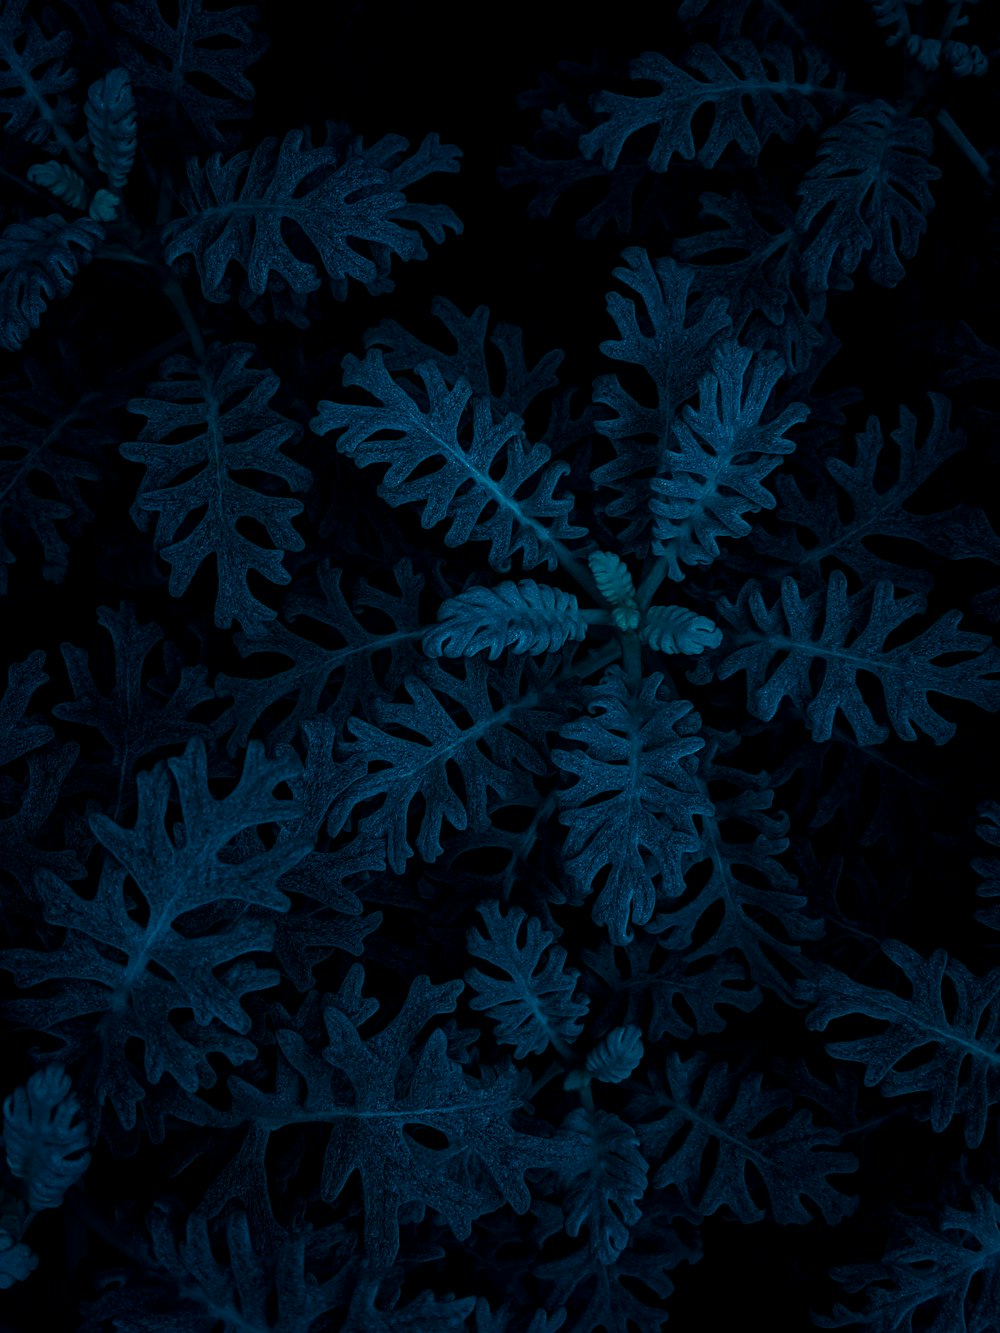 a blue snowflake on a black background